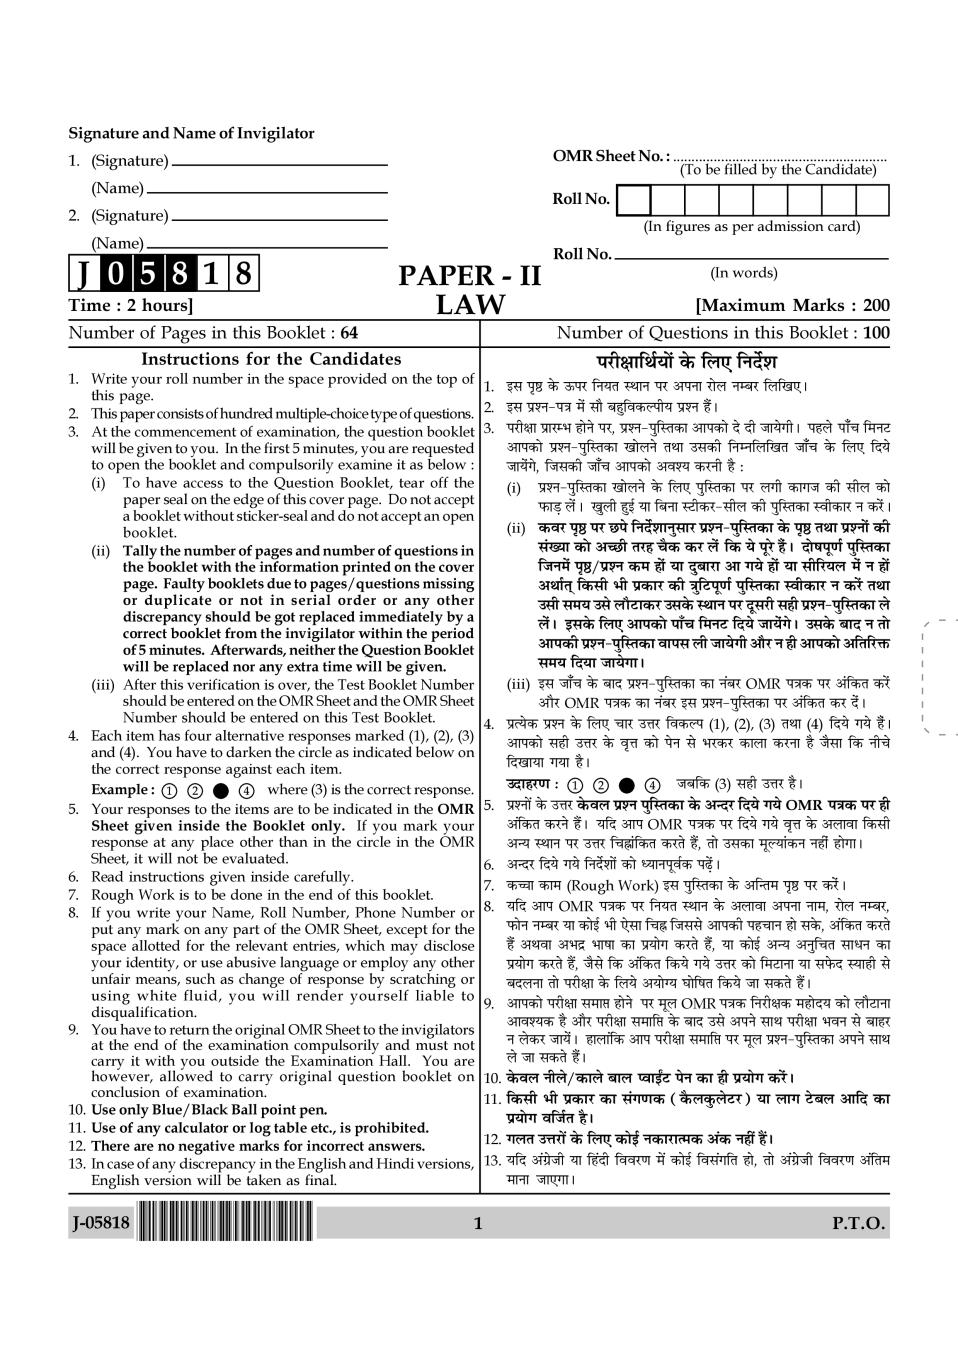 UGC NET Law Question Paper 2018 - Page 1